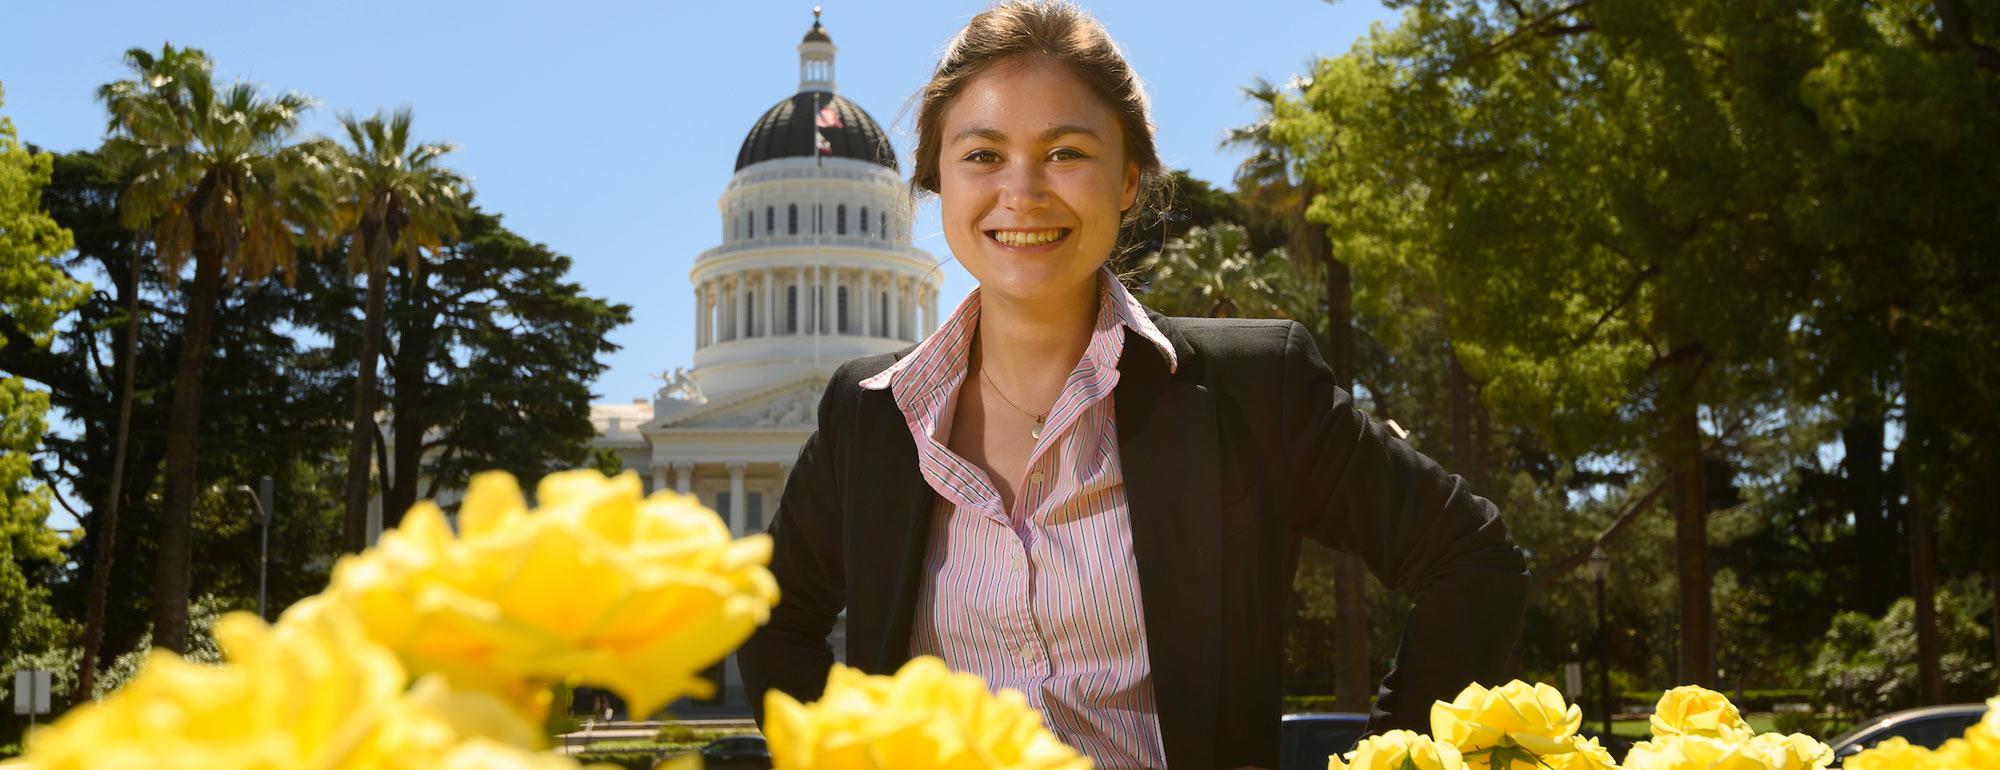 A female student poses in front of the state capitol building